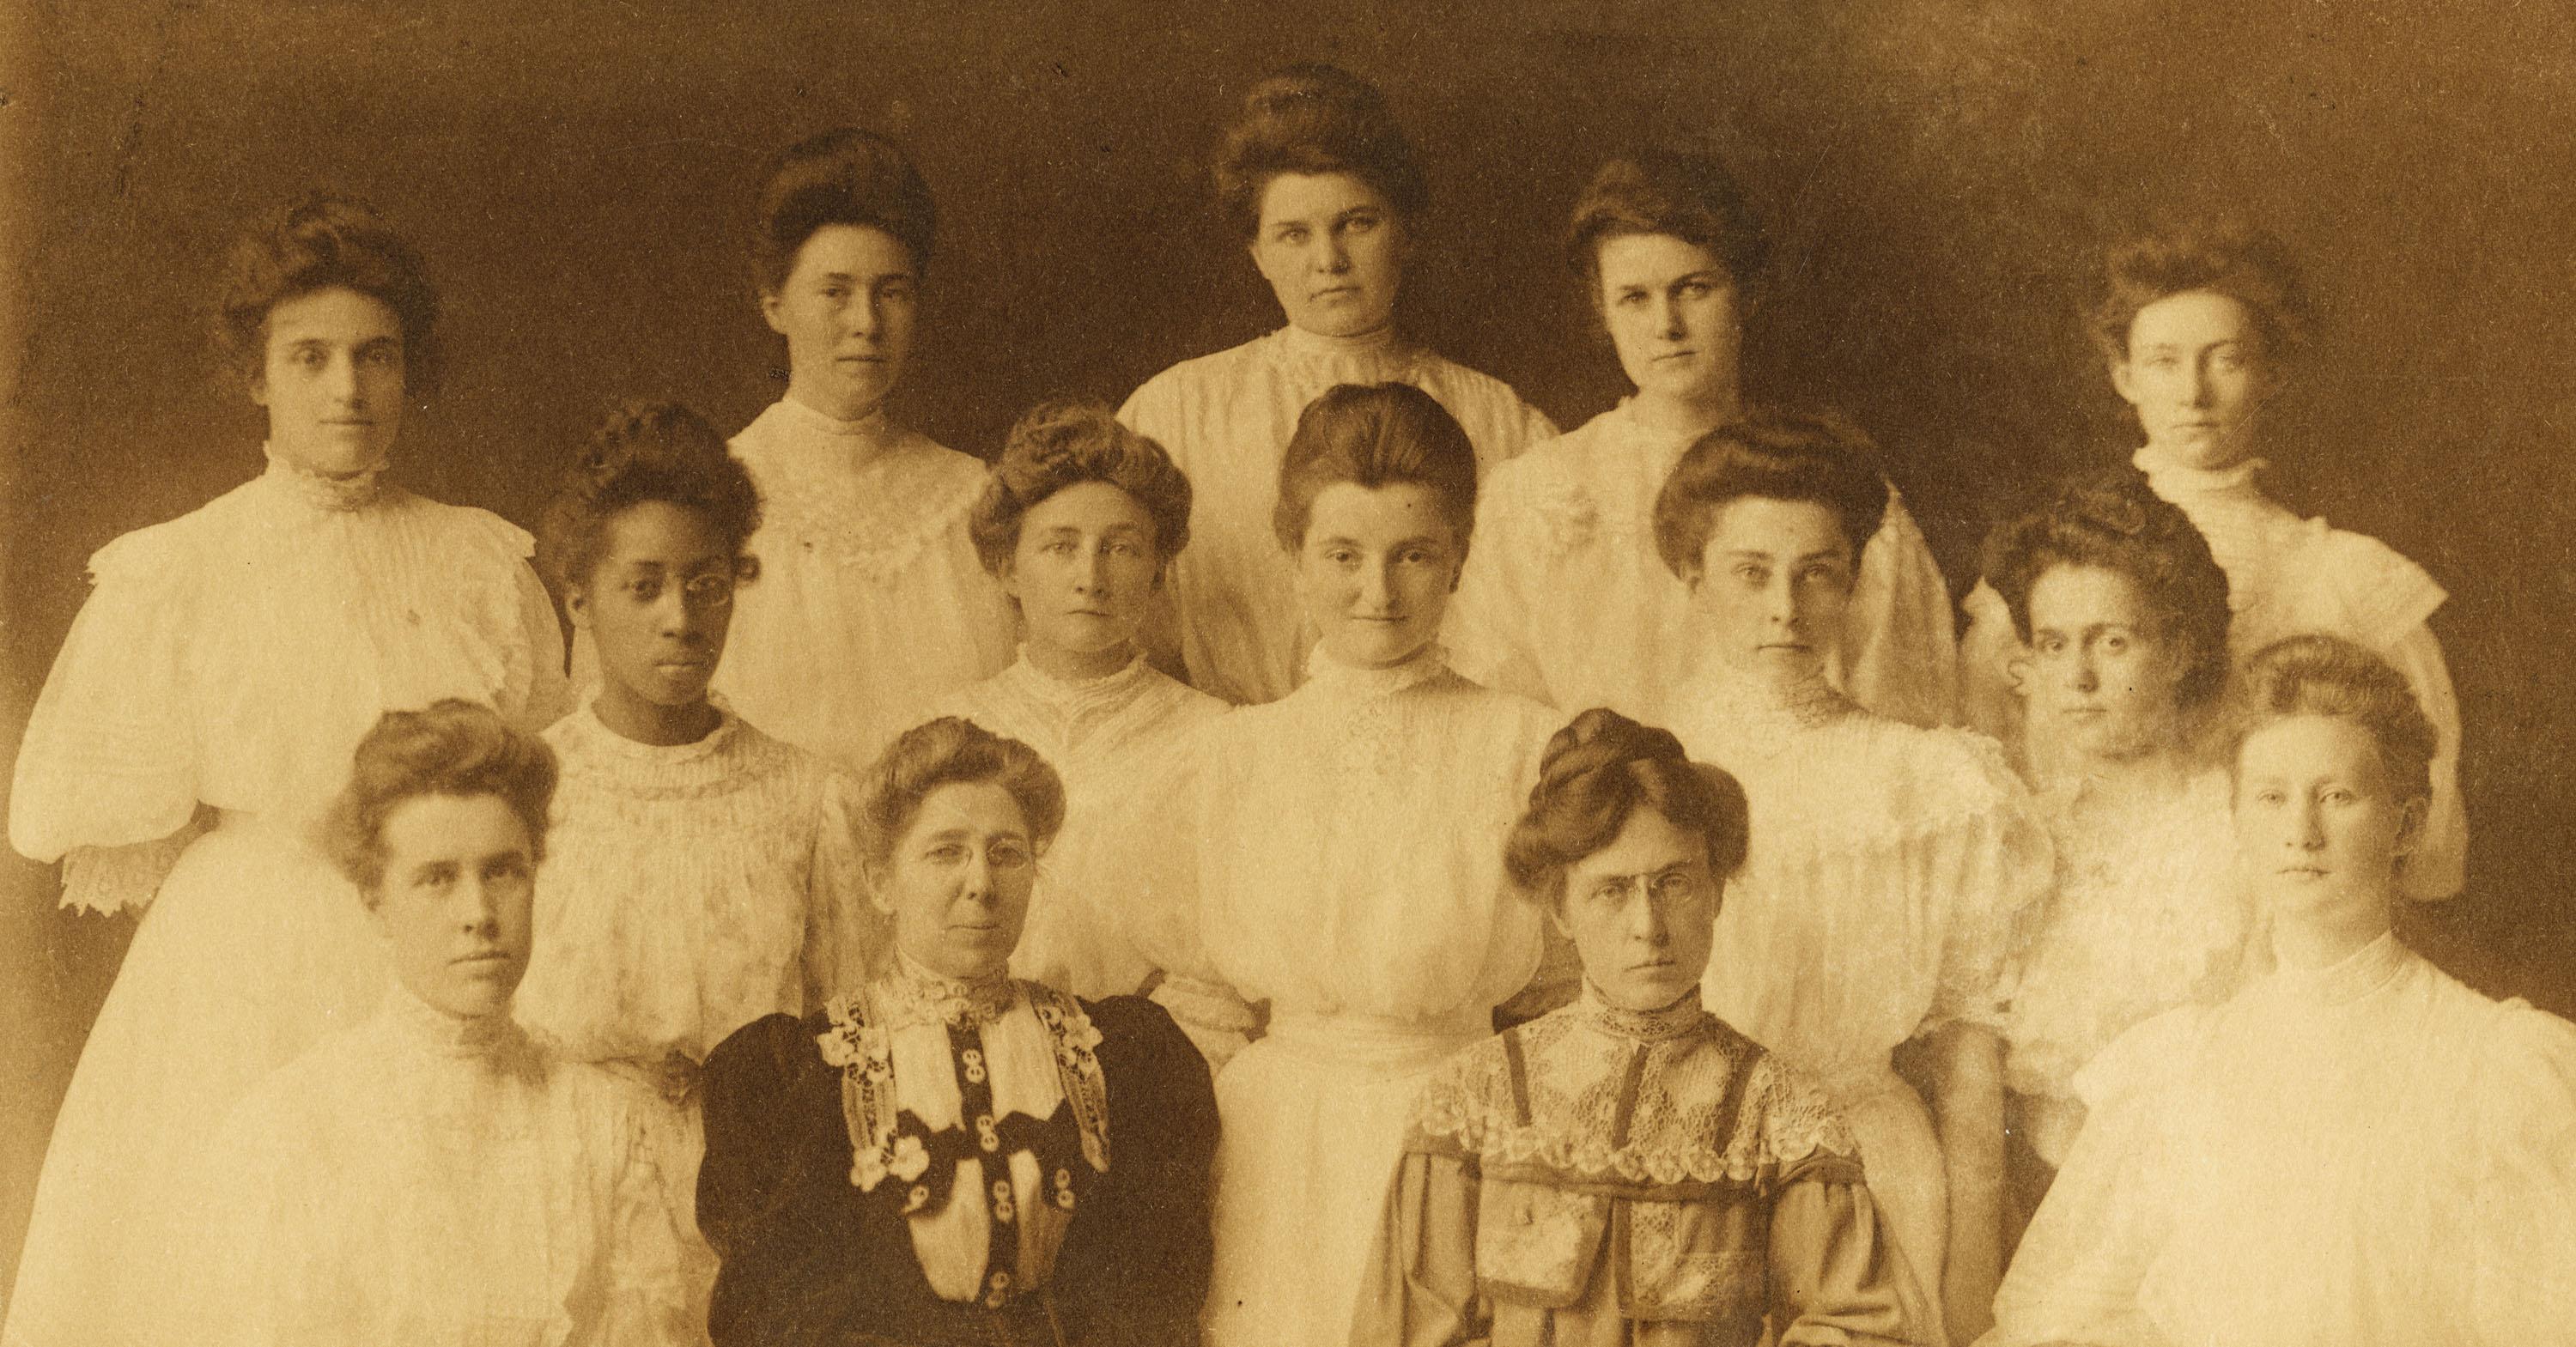 Myrtle Craig Mowbray with other female students.